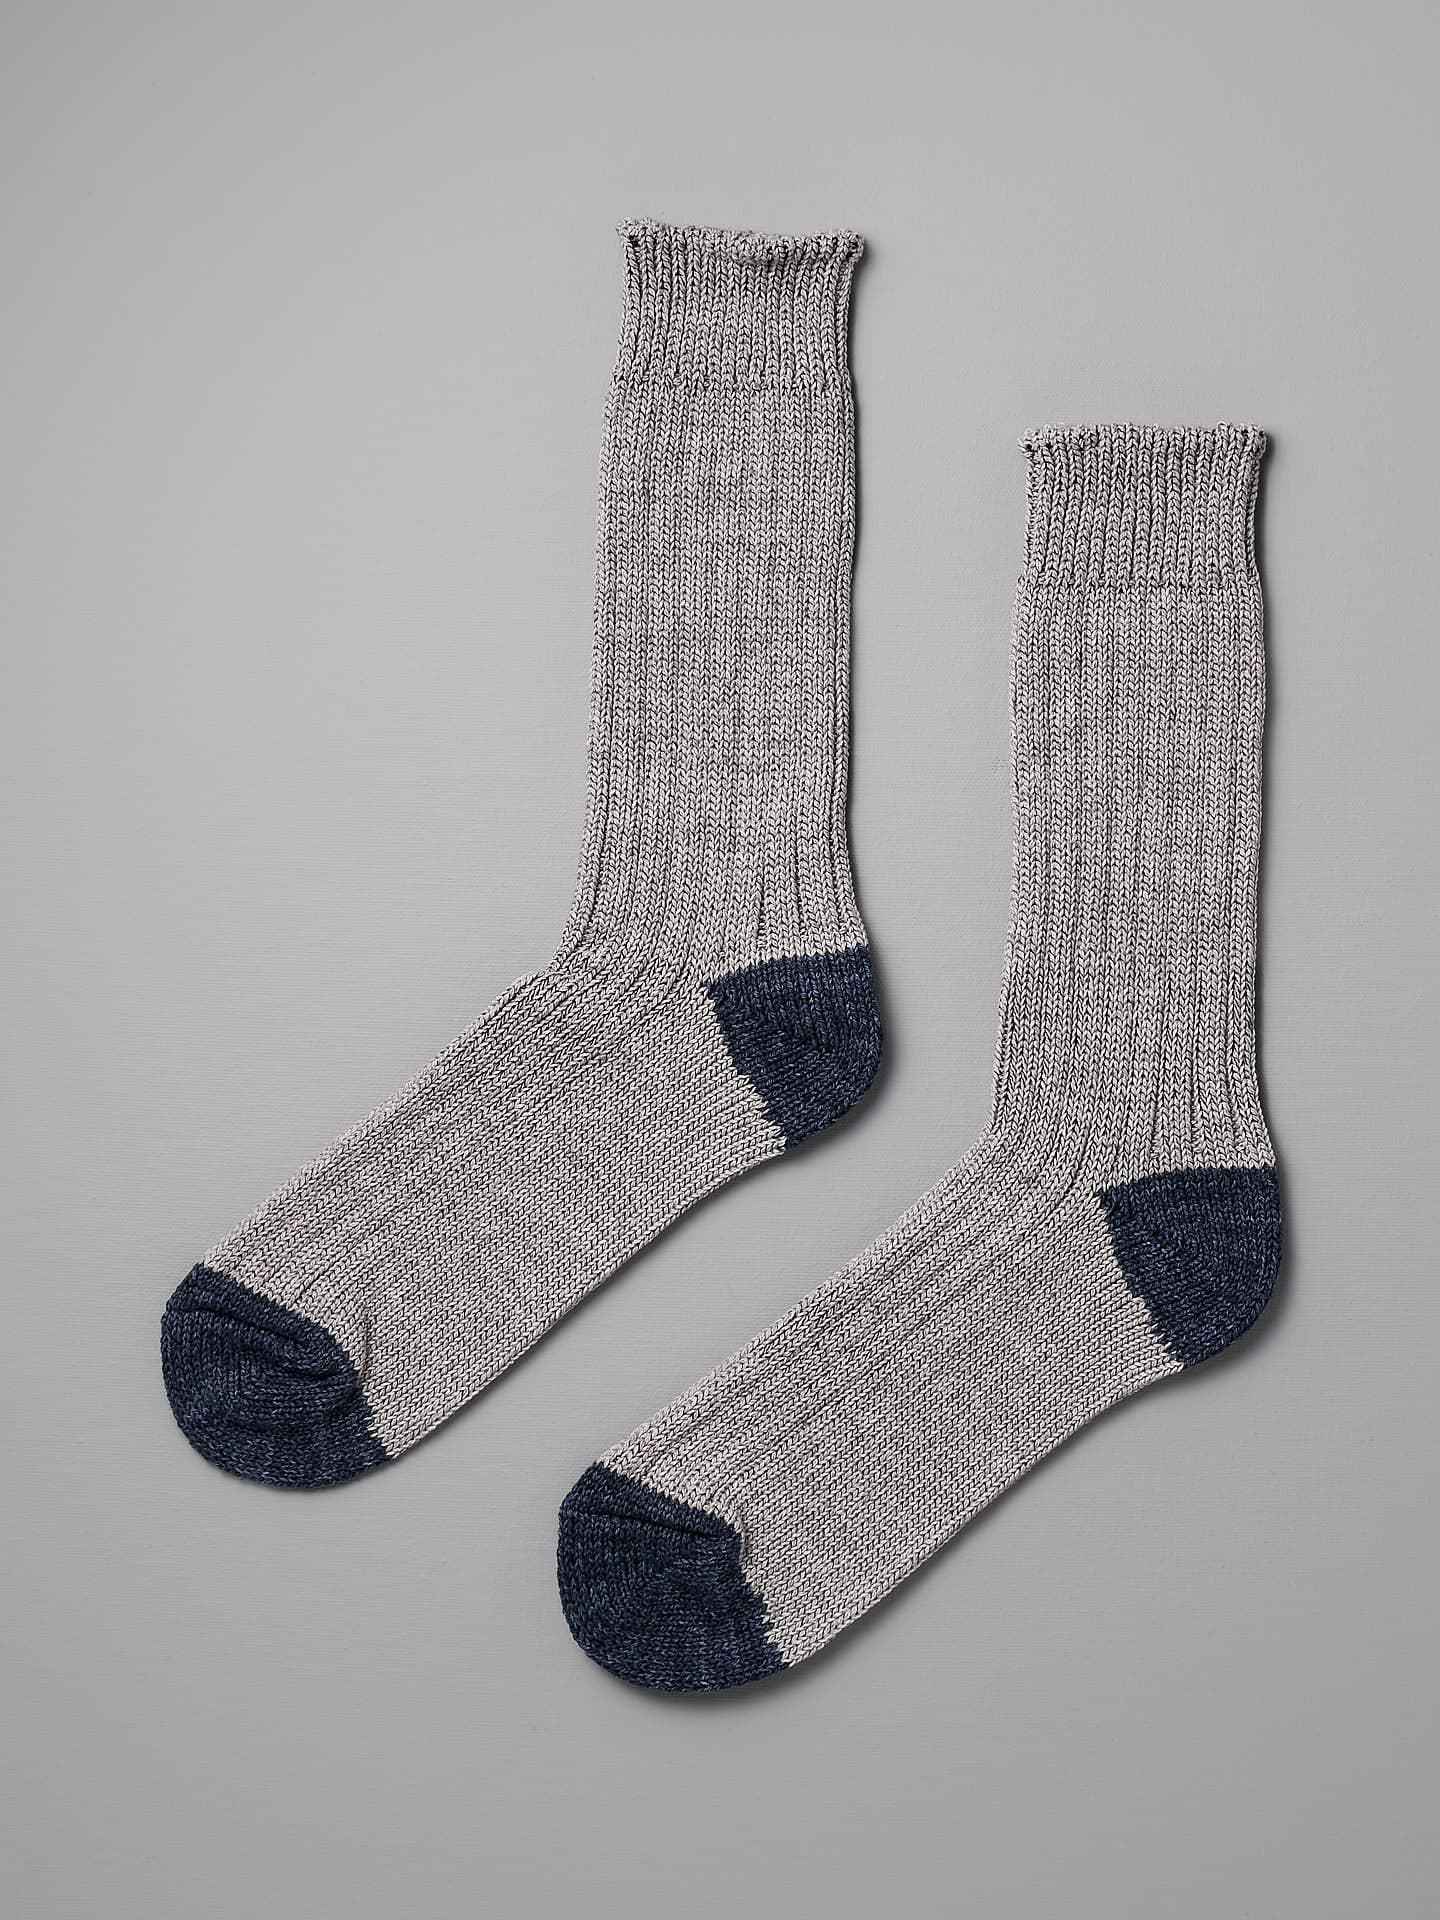 A pair of gray knitted Boston Slab Socks – Grey Denim by Nishiguchi Kutsushita with dark gray toes and heels, displayed against a plain gray background. For the perfect fit, refer to our size chart for EUR to US conversion in shoe sizes.